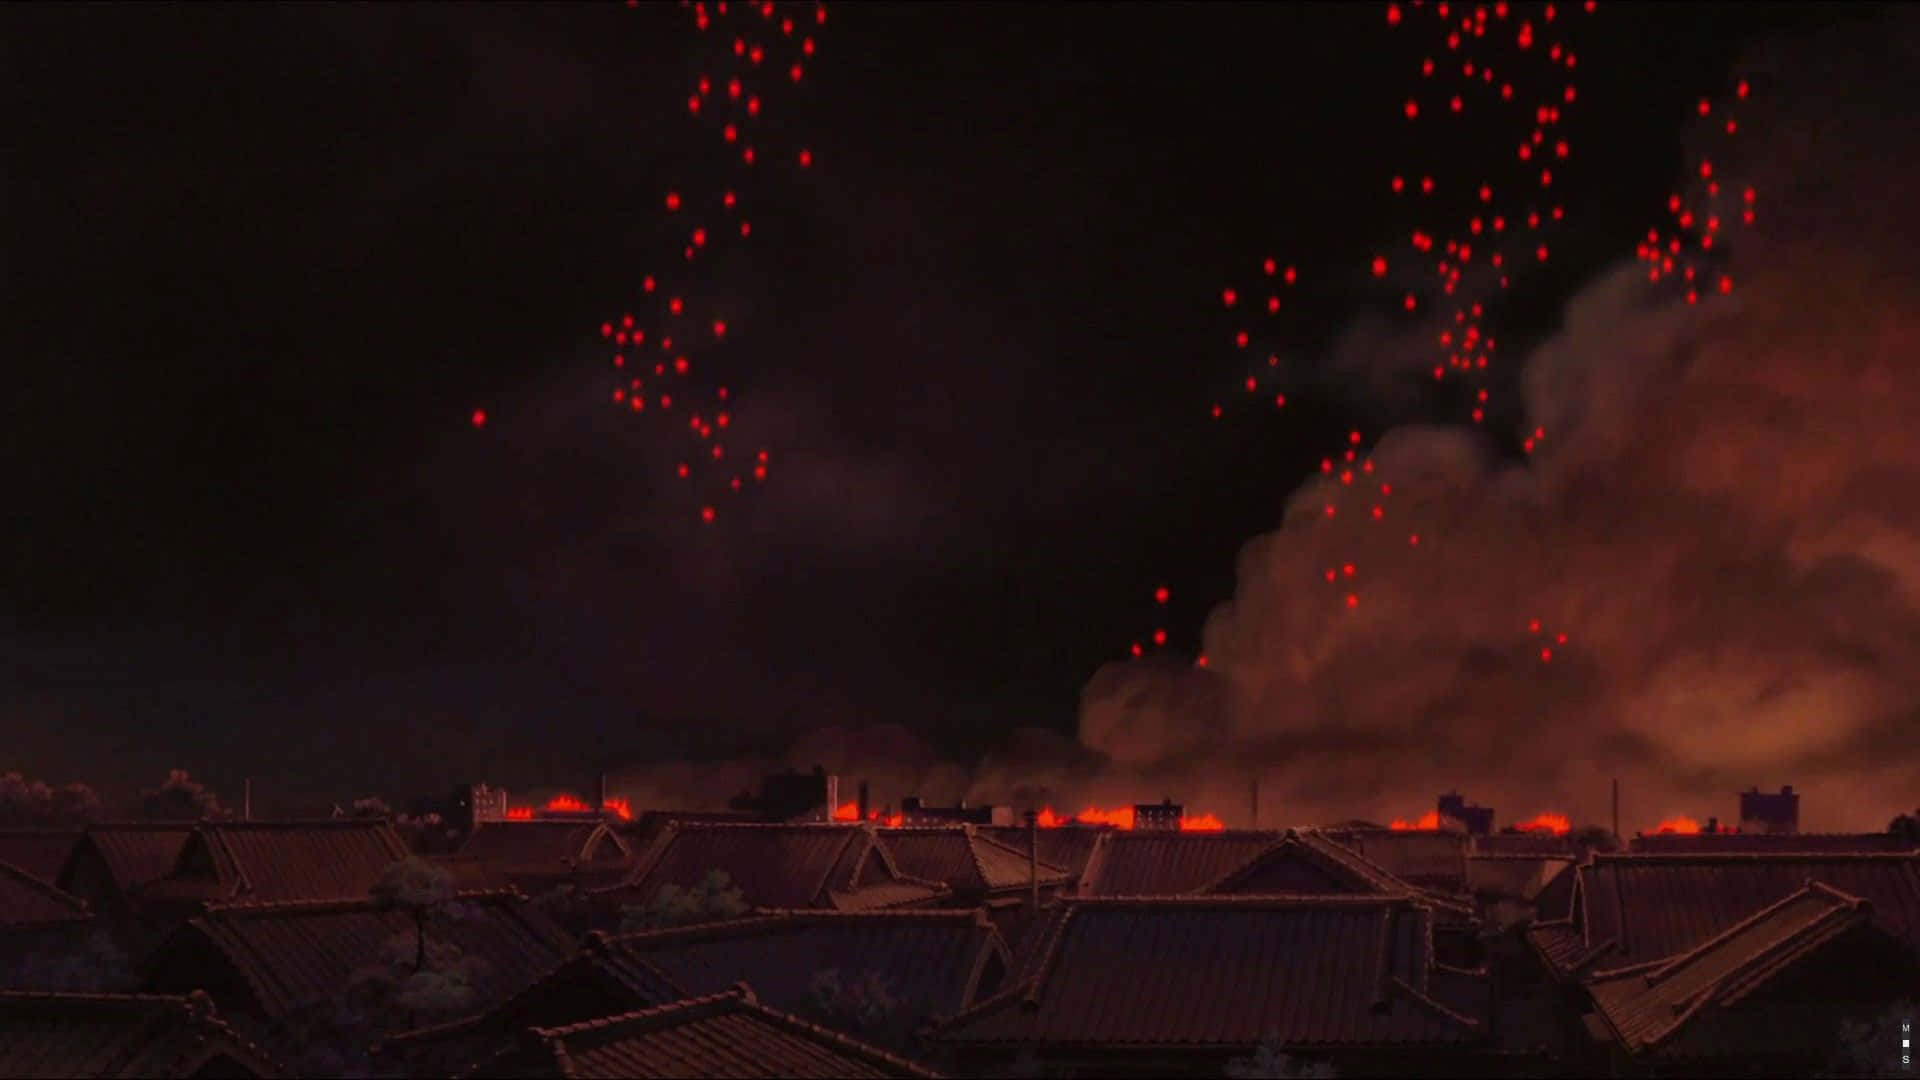 Grave Of The Fireflies Background